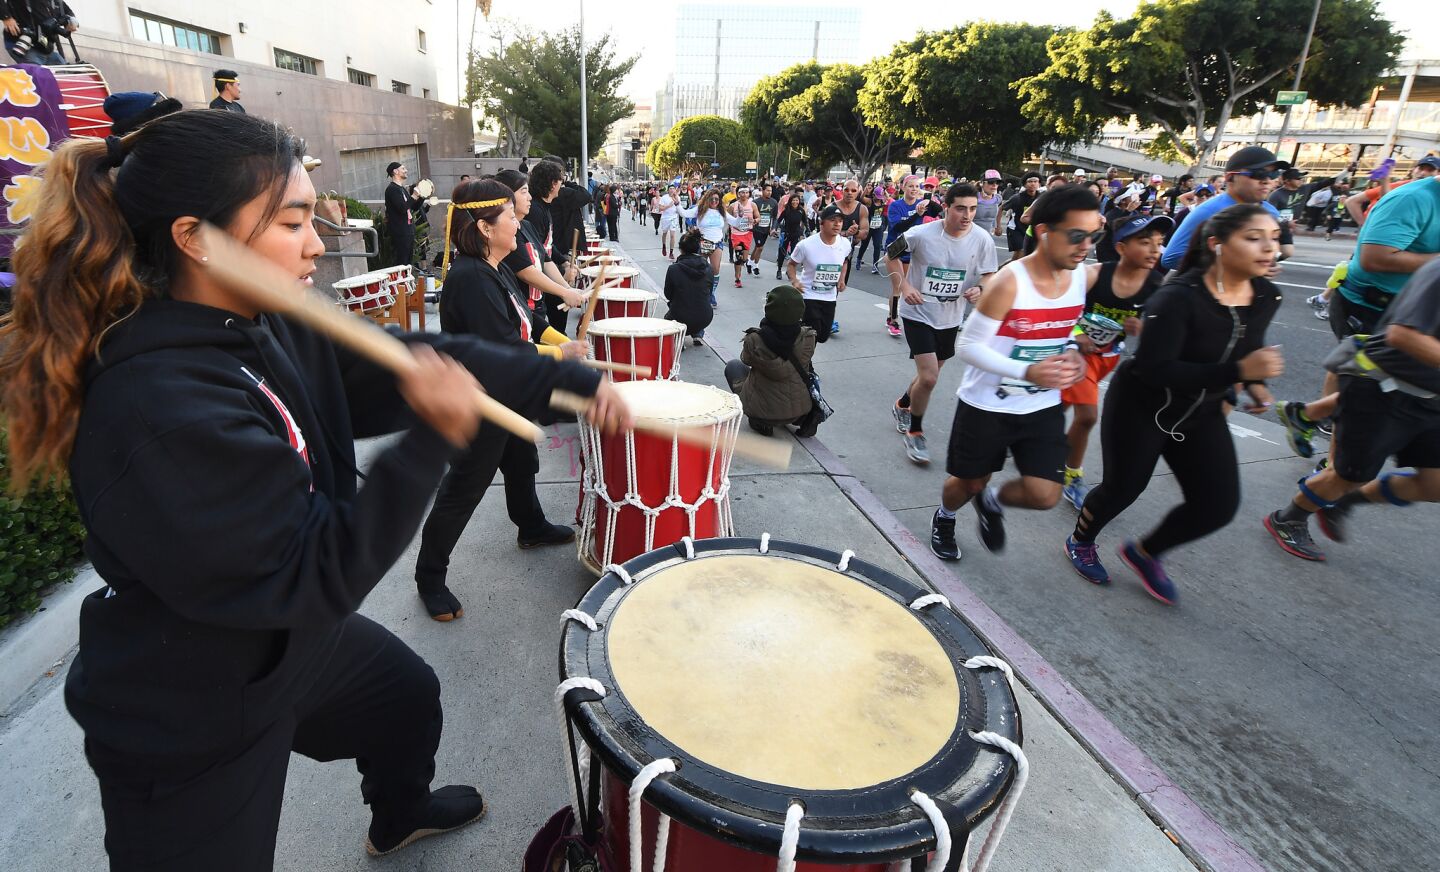 Drummers pound a beat for runners in downtown during the L.A. Marathon.